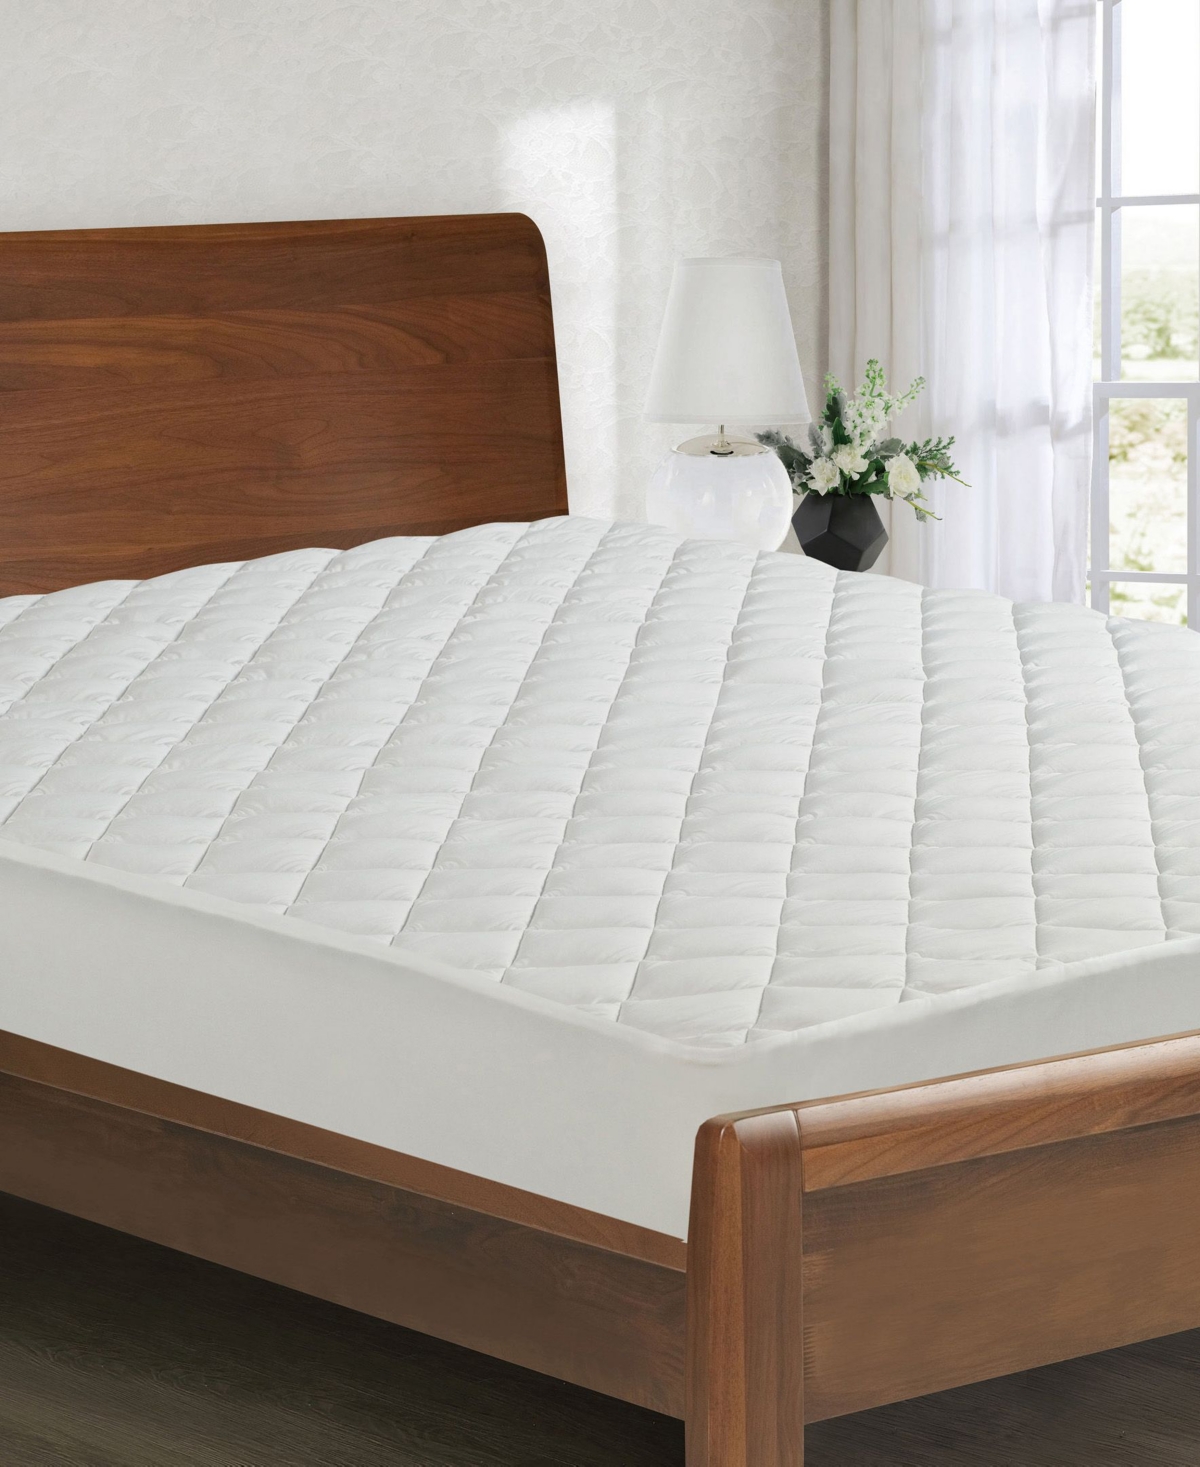 All-In-One All Season Reversible Cooling Warming Fitted Mattress Pad, Queen